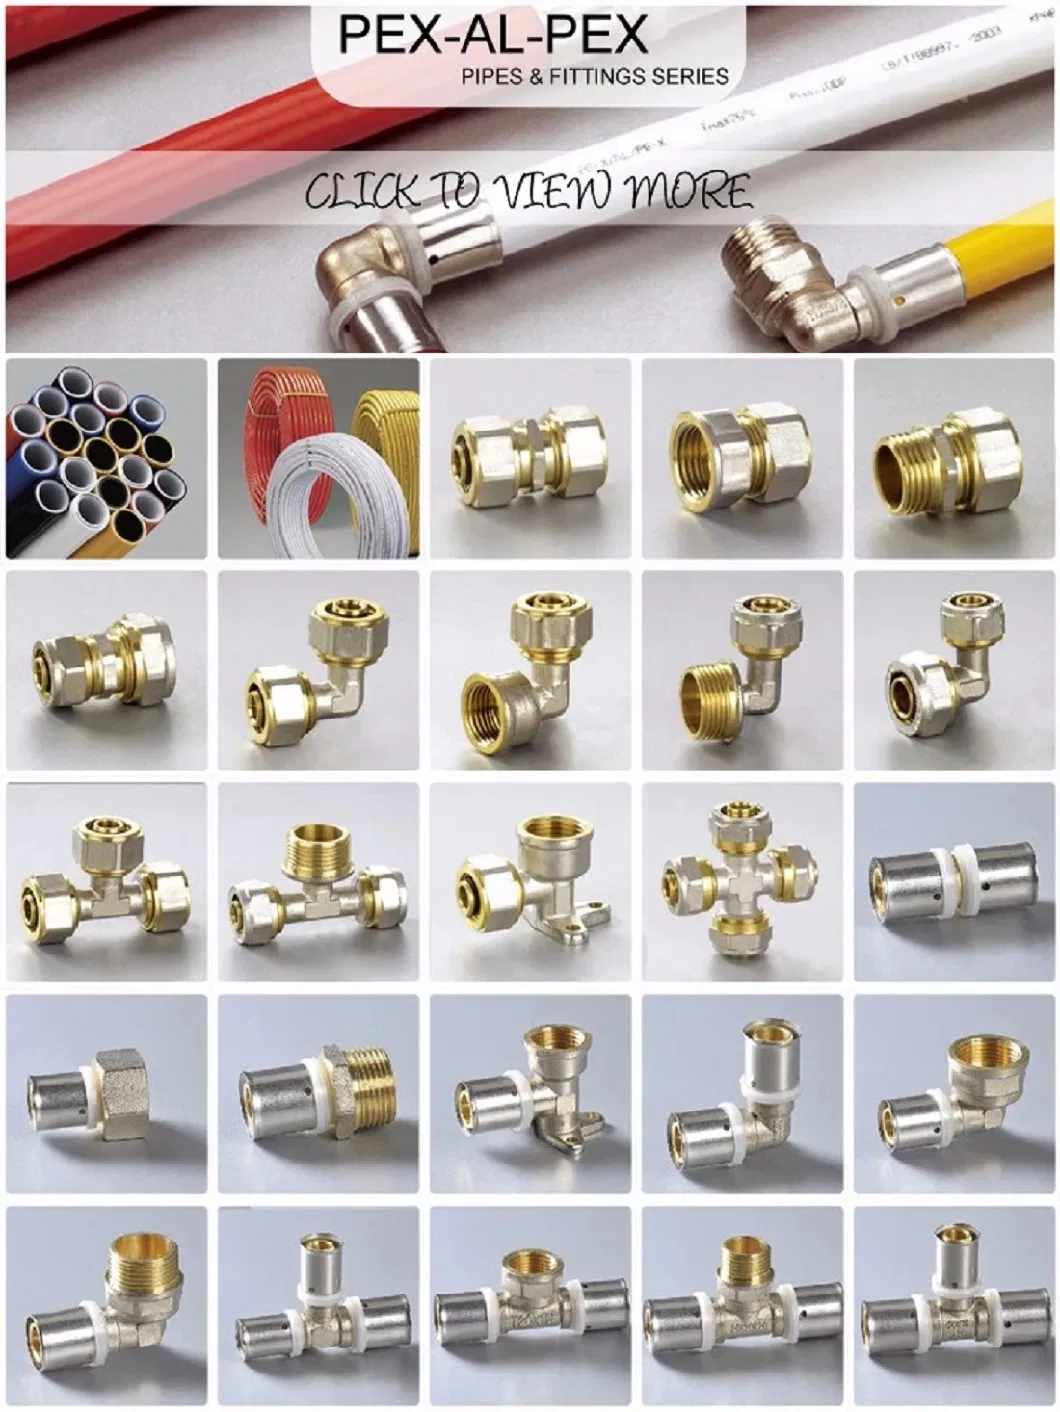 Press-Fit Stainless Steel/Brass Aluminum-Plastic Pipe Fittings, Aluminum-Plastic Pipes, All-Copper, Press-Type, Direct Elbows, Tees Customized